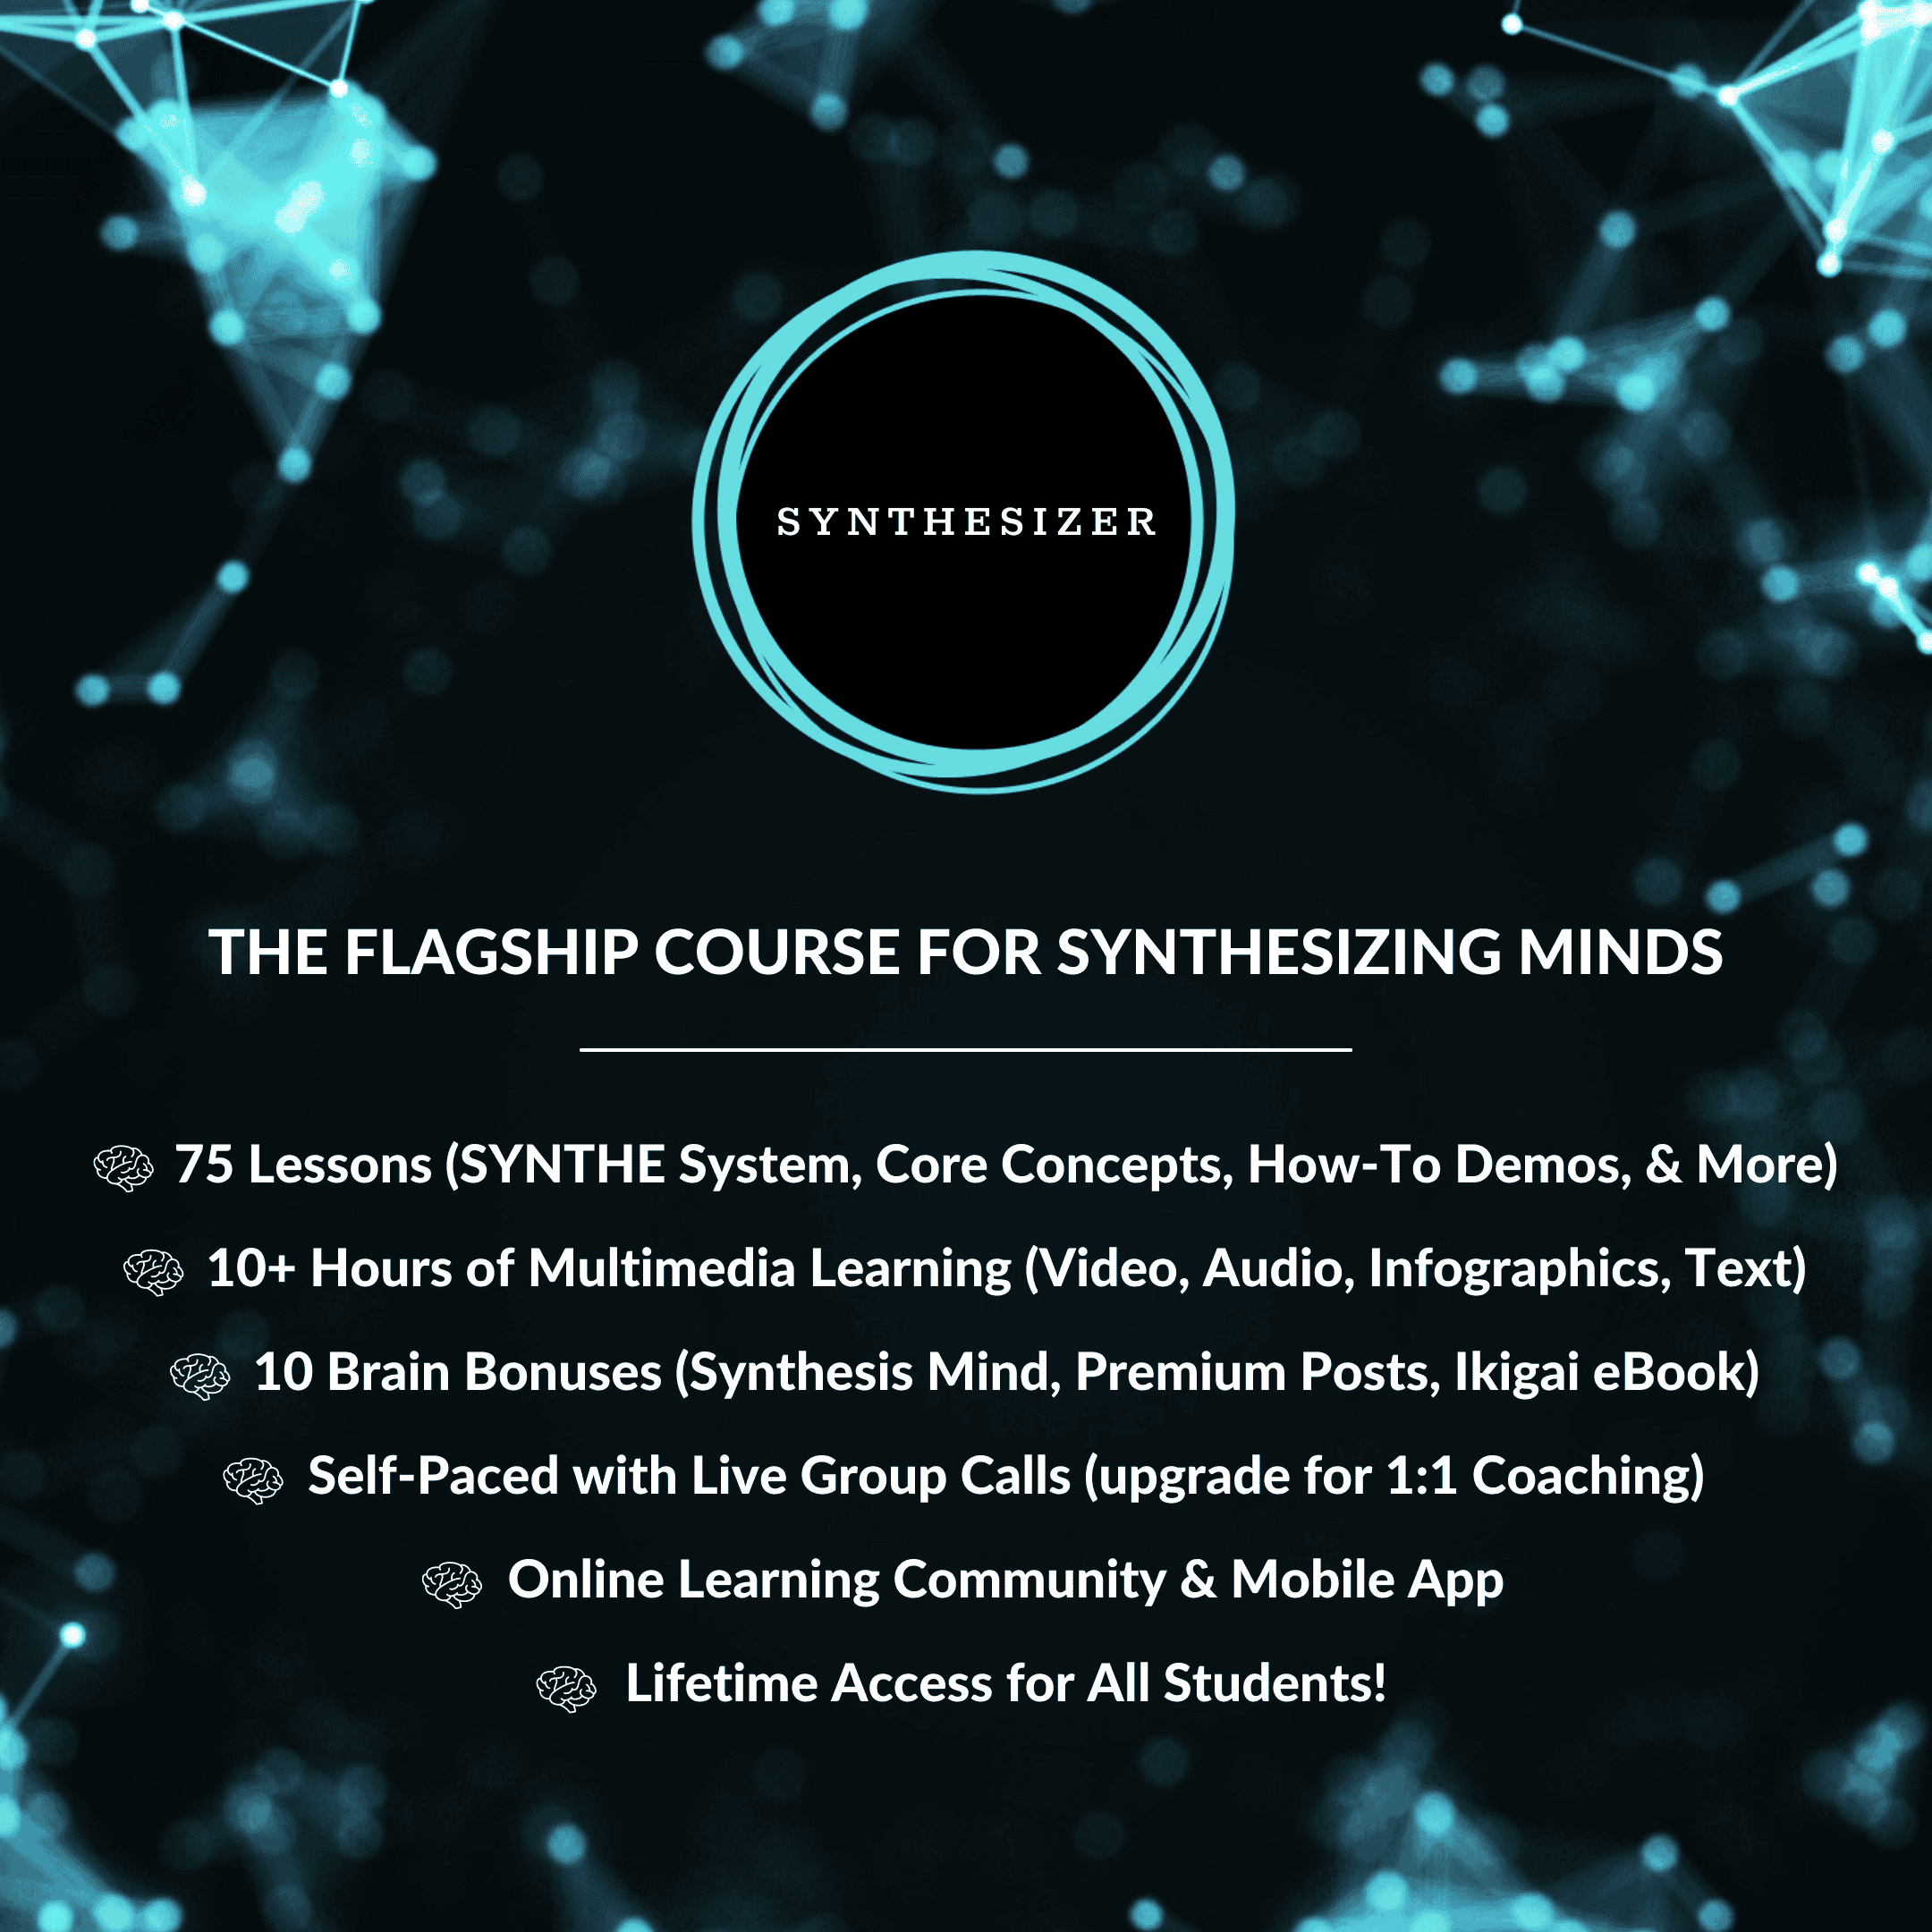 Synthesizer Course Overview